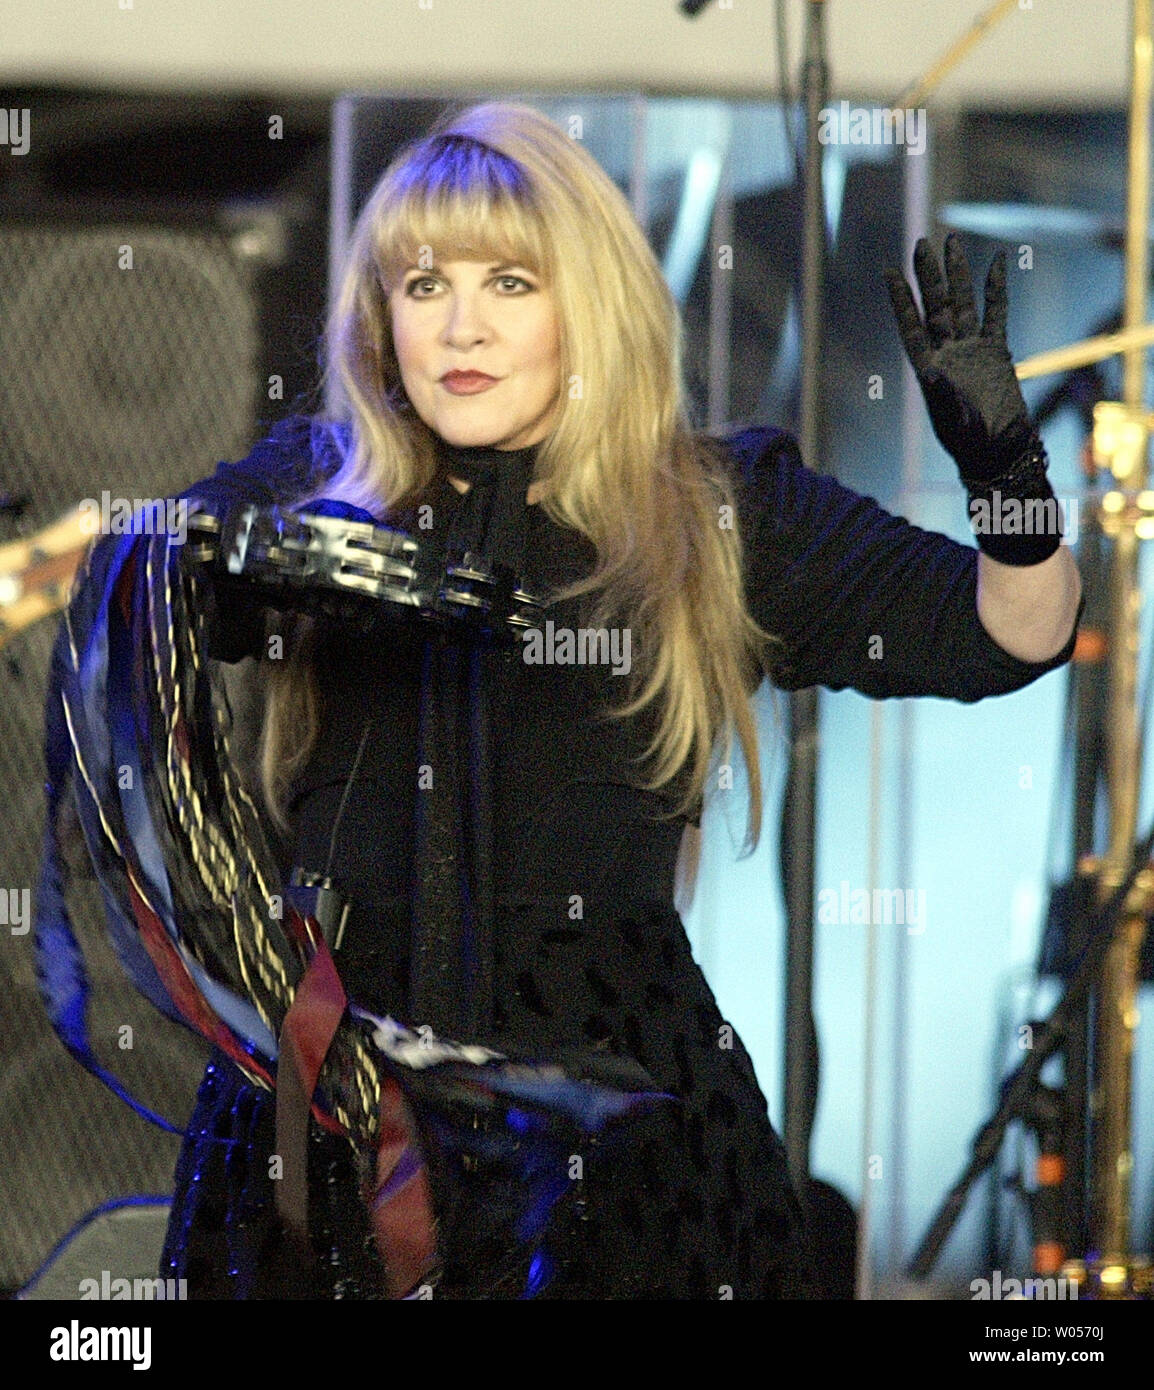 Stevie Nicks of Fleetwood Mac plays the tambourine during their performance  at the White River Amphitheatre in Auburn, WA., on July 1, 2004. This is  the 25th stop of their 35 city